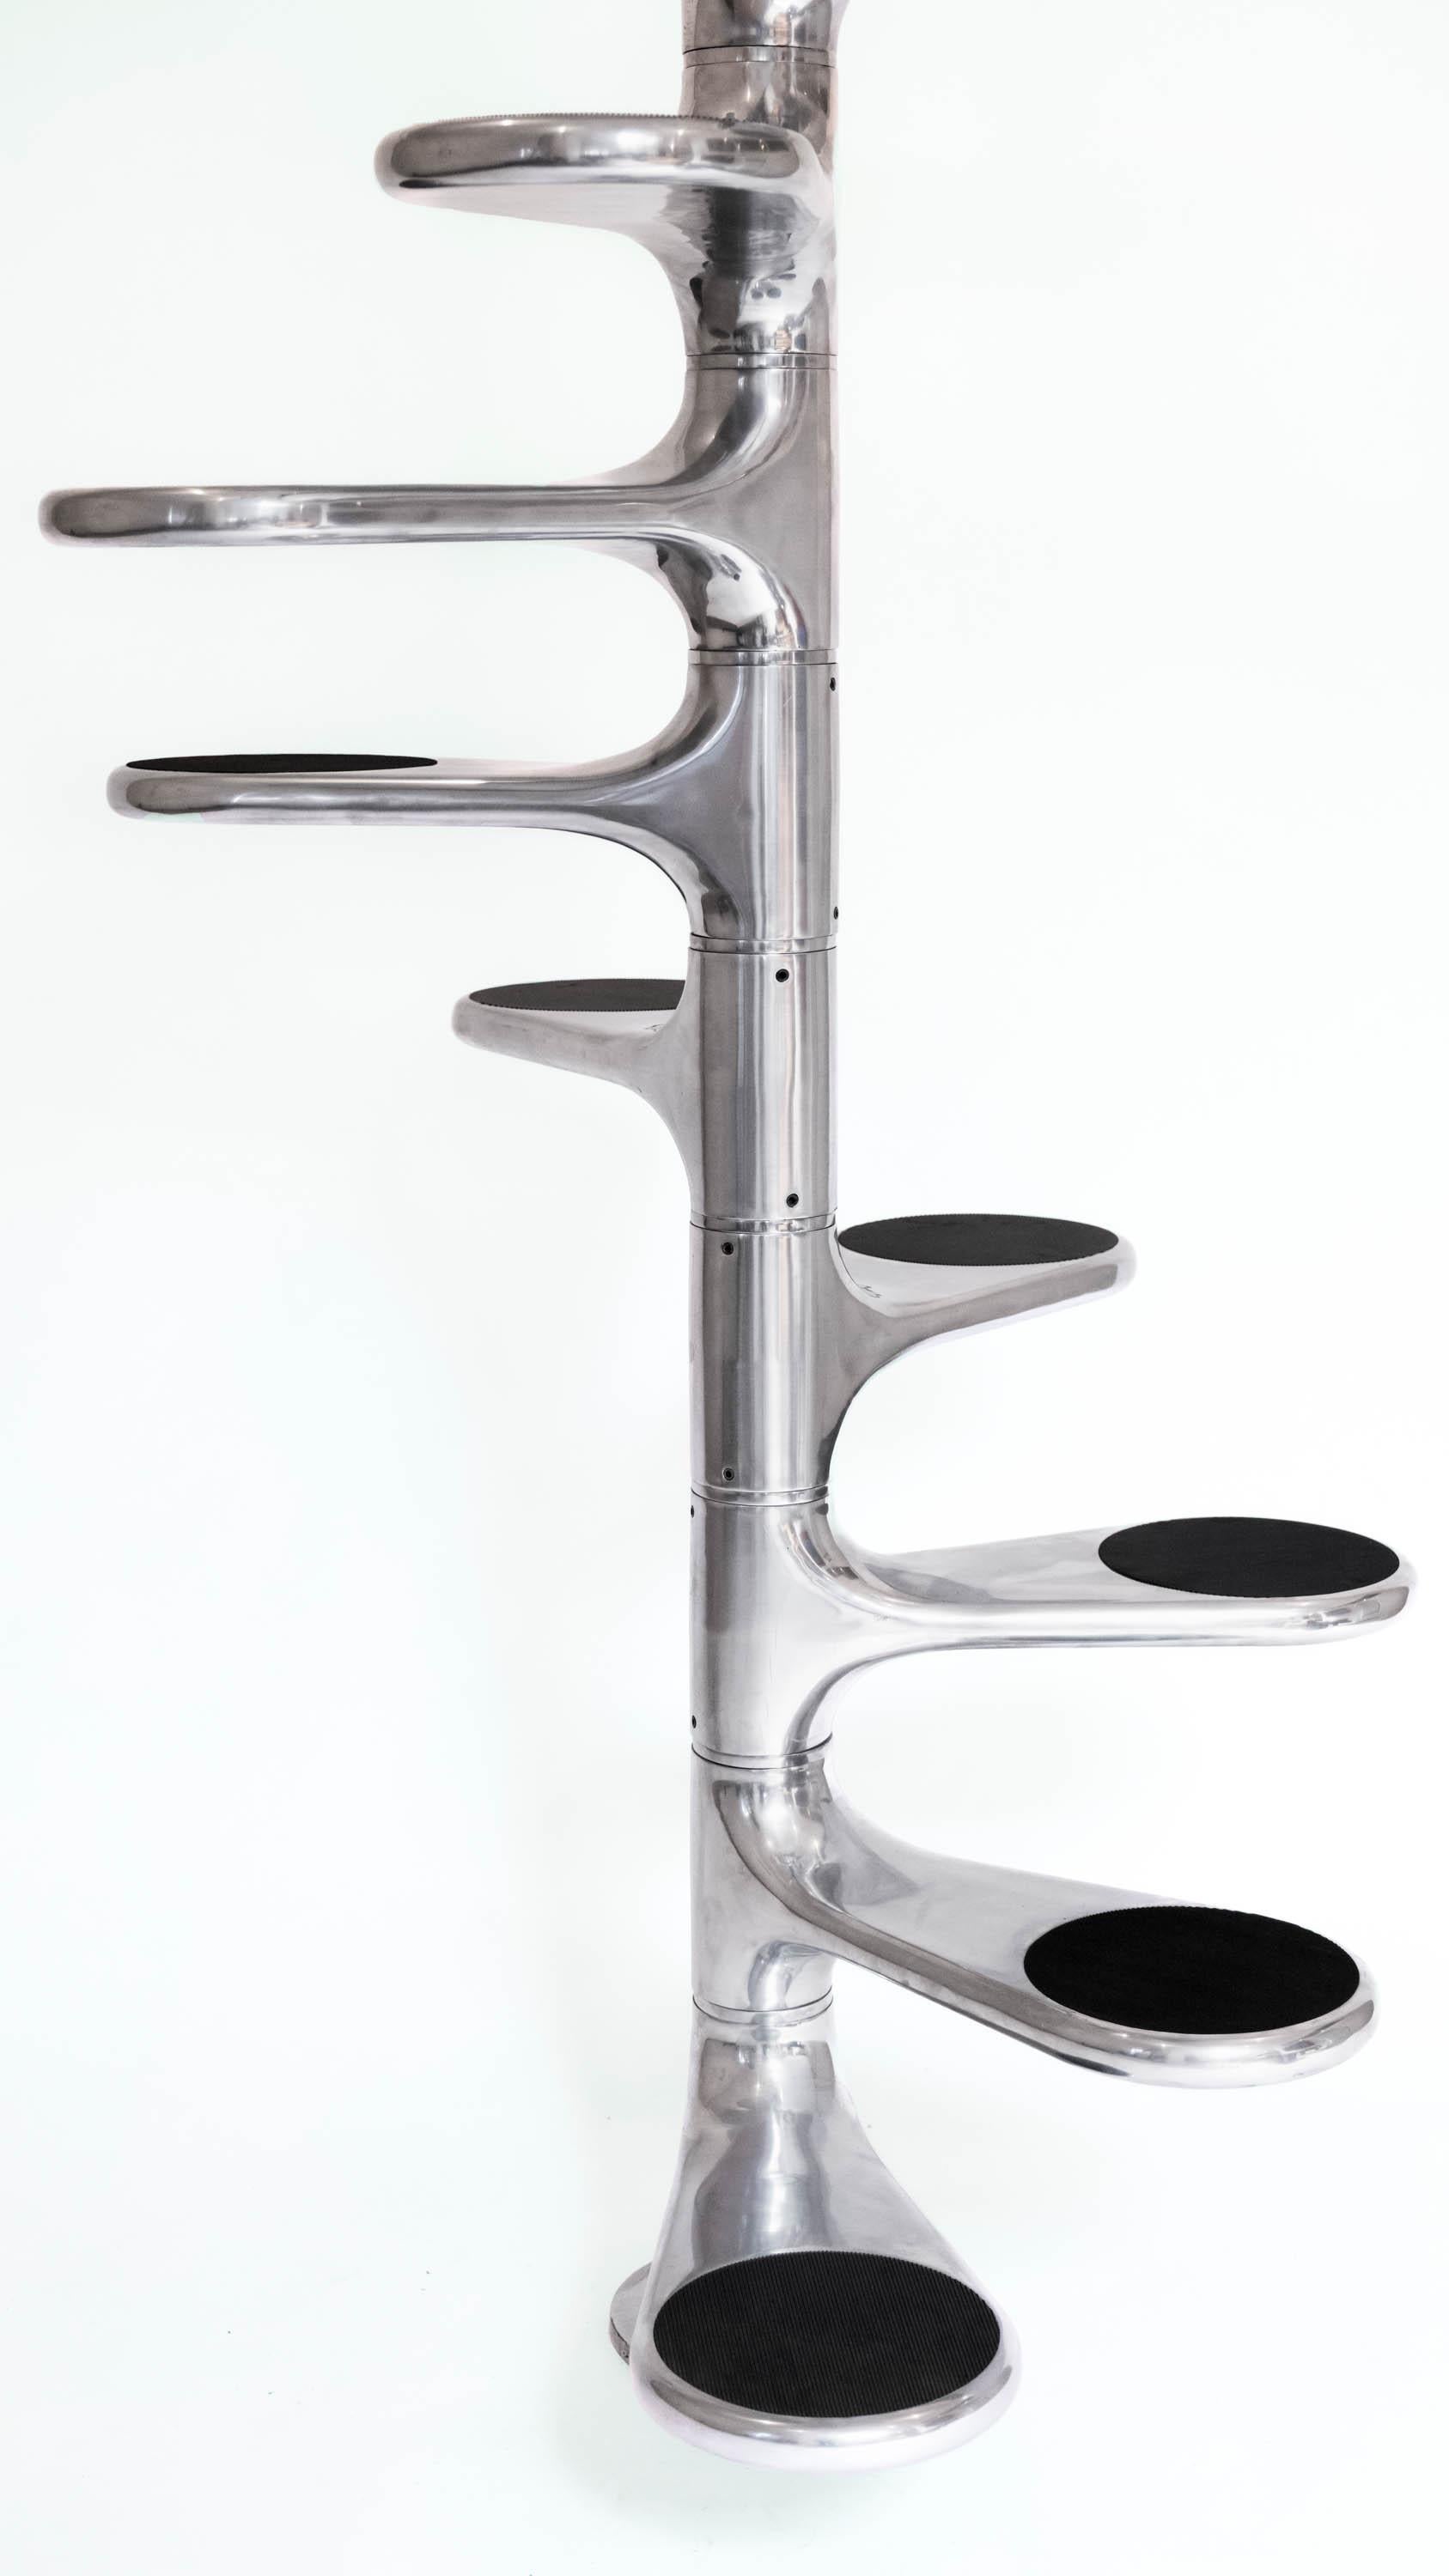 HELICOID STAIRCASE
ROGER TALLON

Helicoid staircase, also known as Escalier M400, designed by the French industrial designer Roger Tallon, produced by Sentou. 13 total steps in cast and polished aluminum with black non slip rubber on the surface.